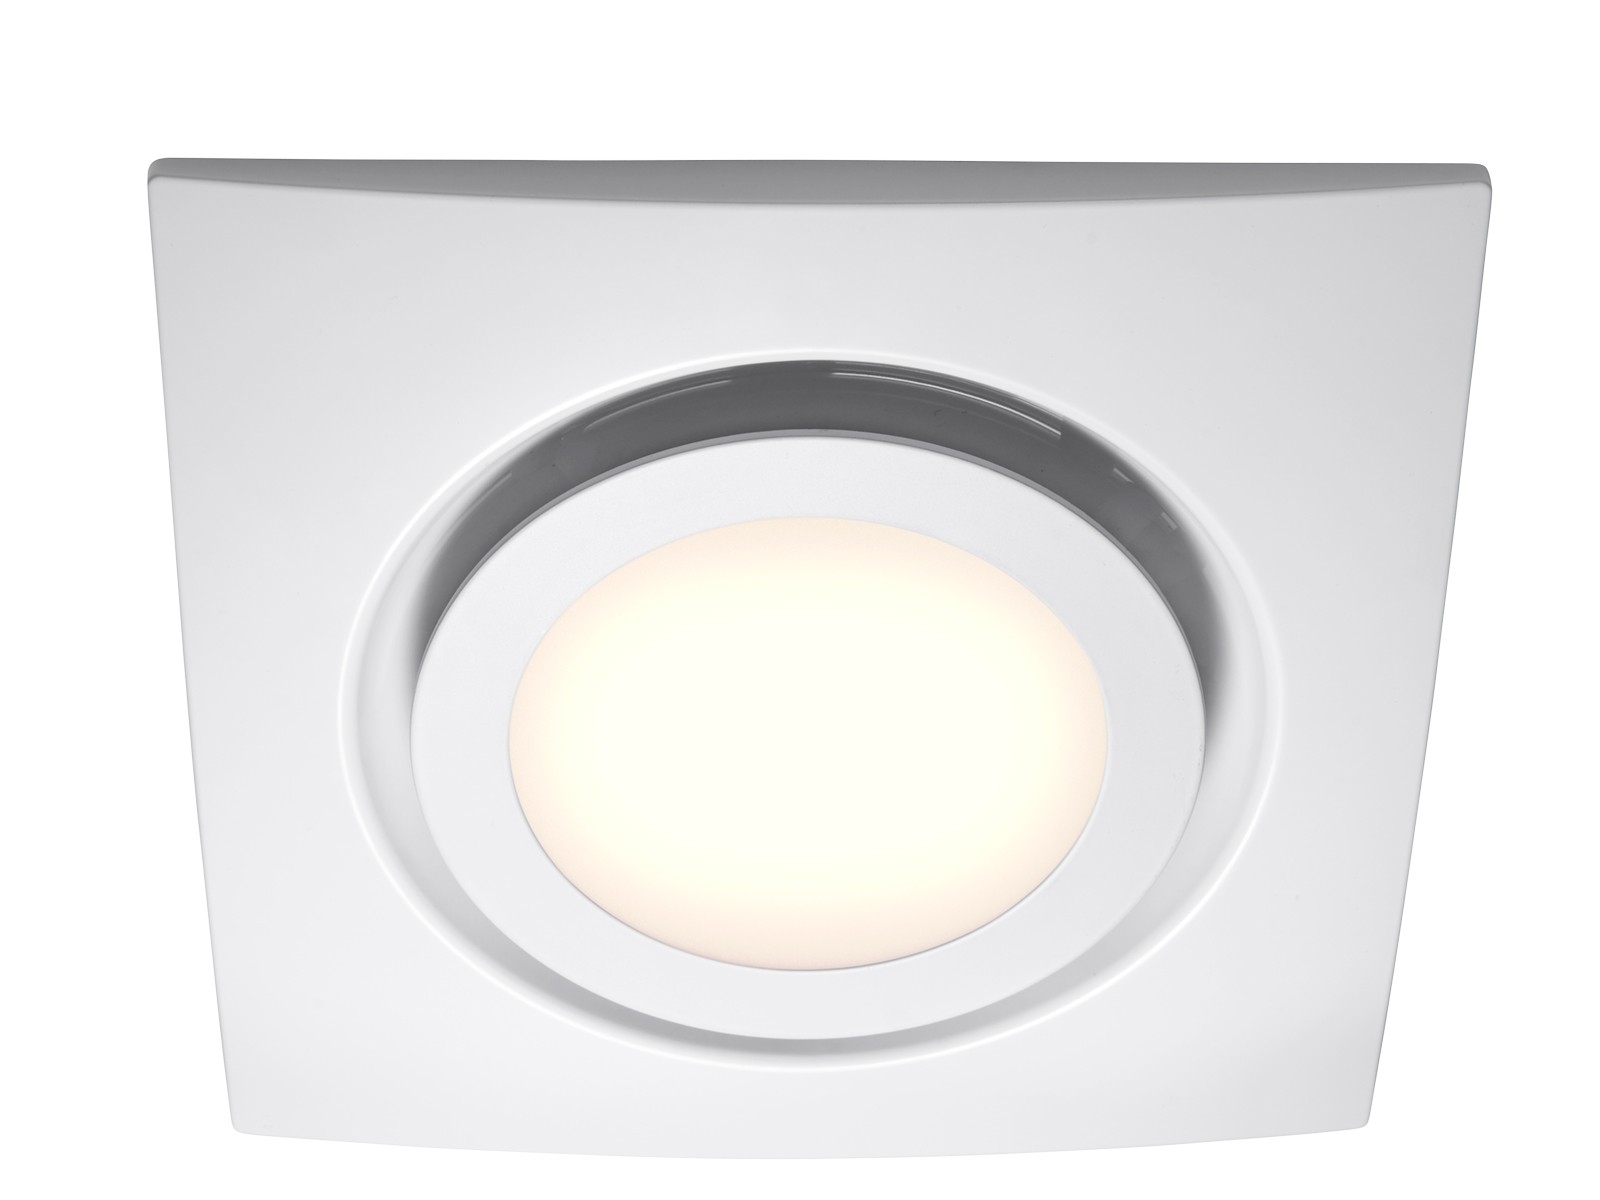 Bathroom Ceiling Extractor Fan With Led Light